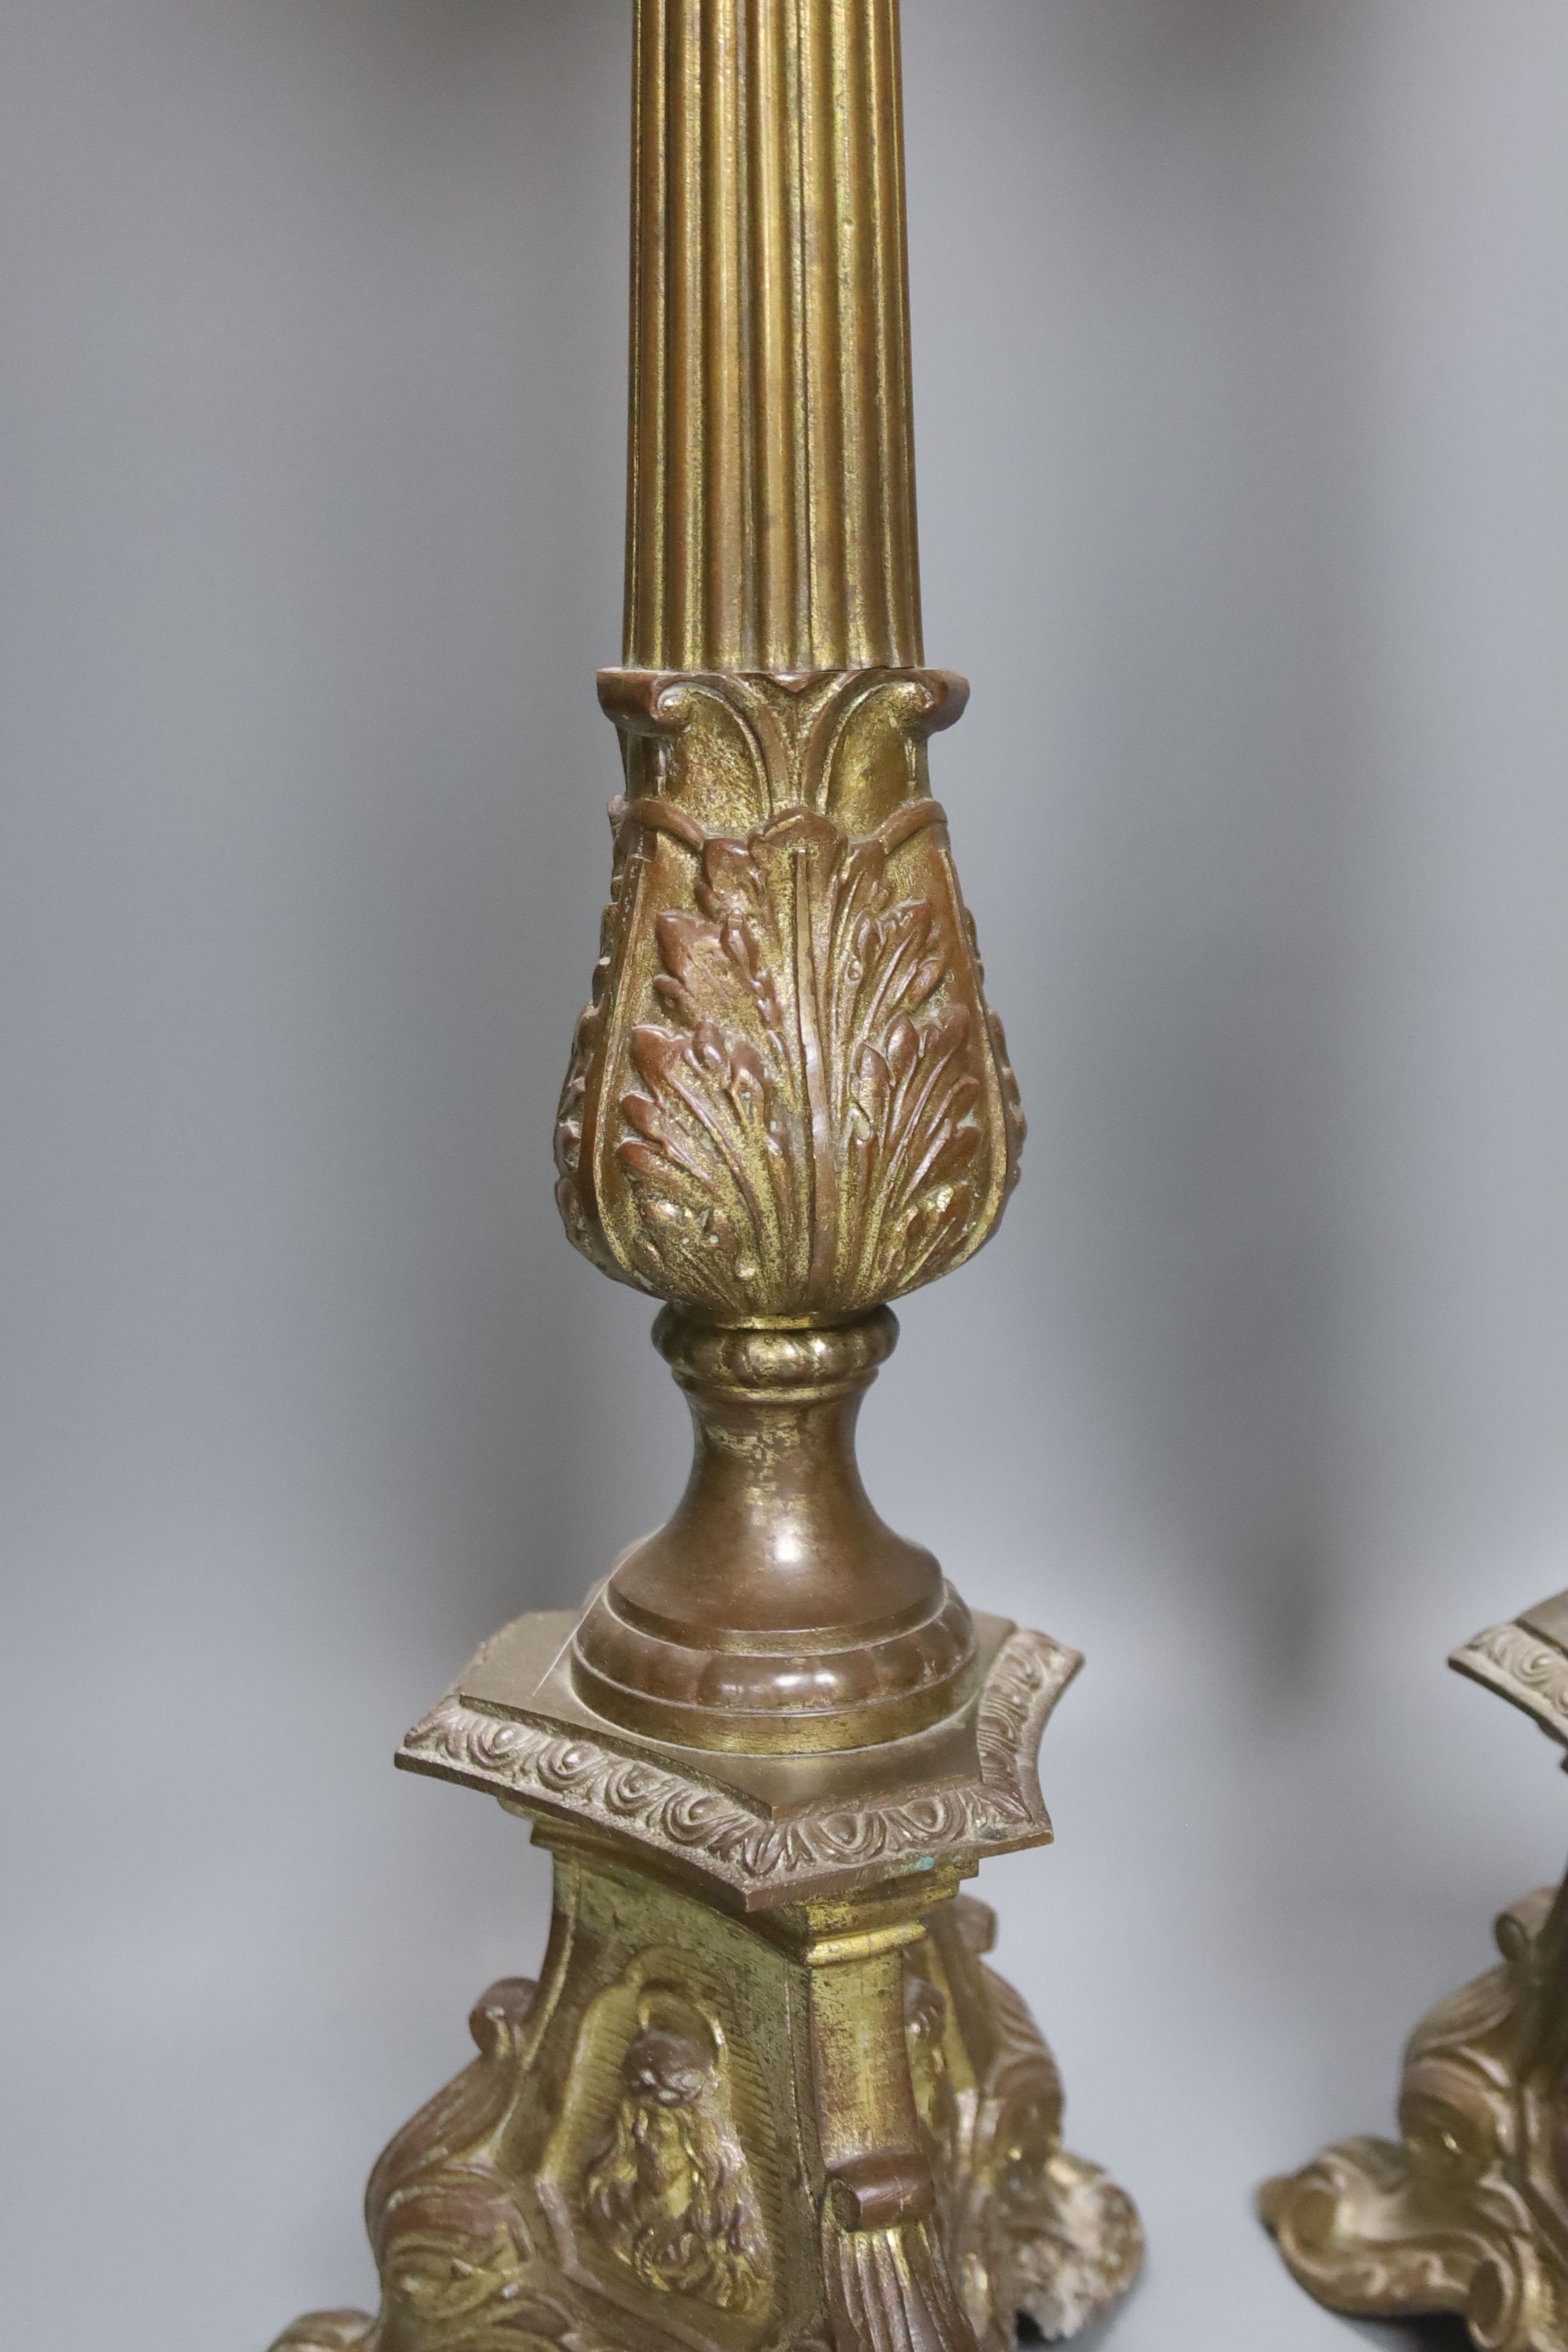 A pair of gilded brass pricket candlesticks 61cm